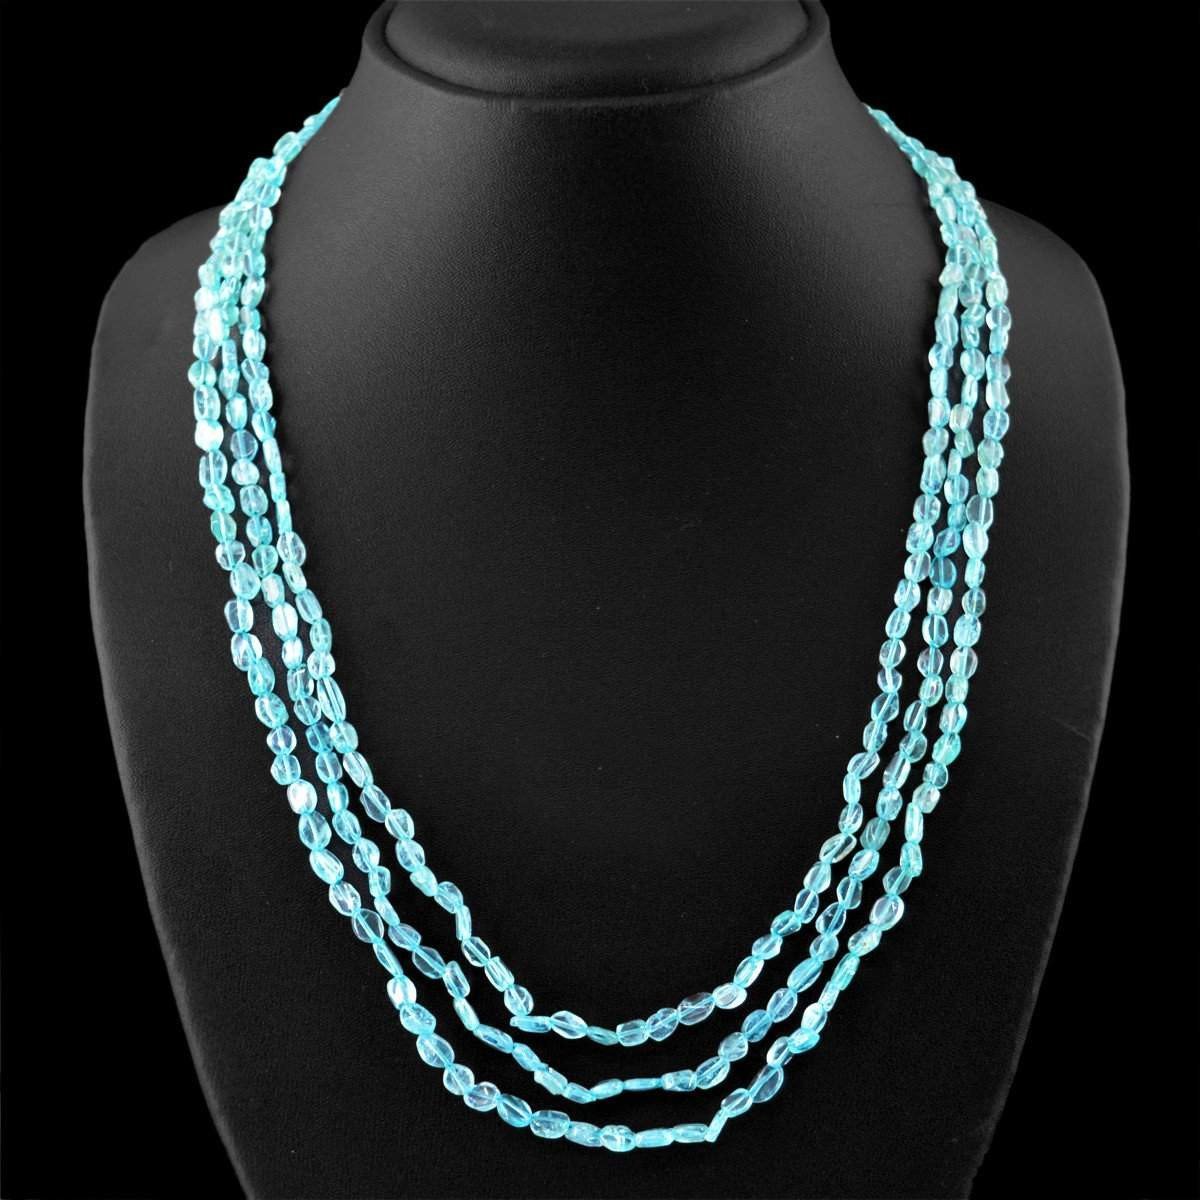 gemsmore:Natural Blue Apatite Necklace Untreated 3 Strand Oval Beads